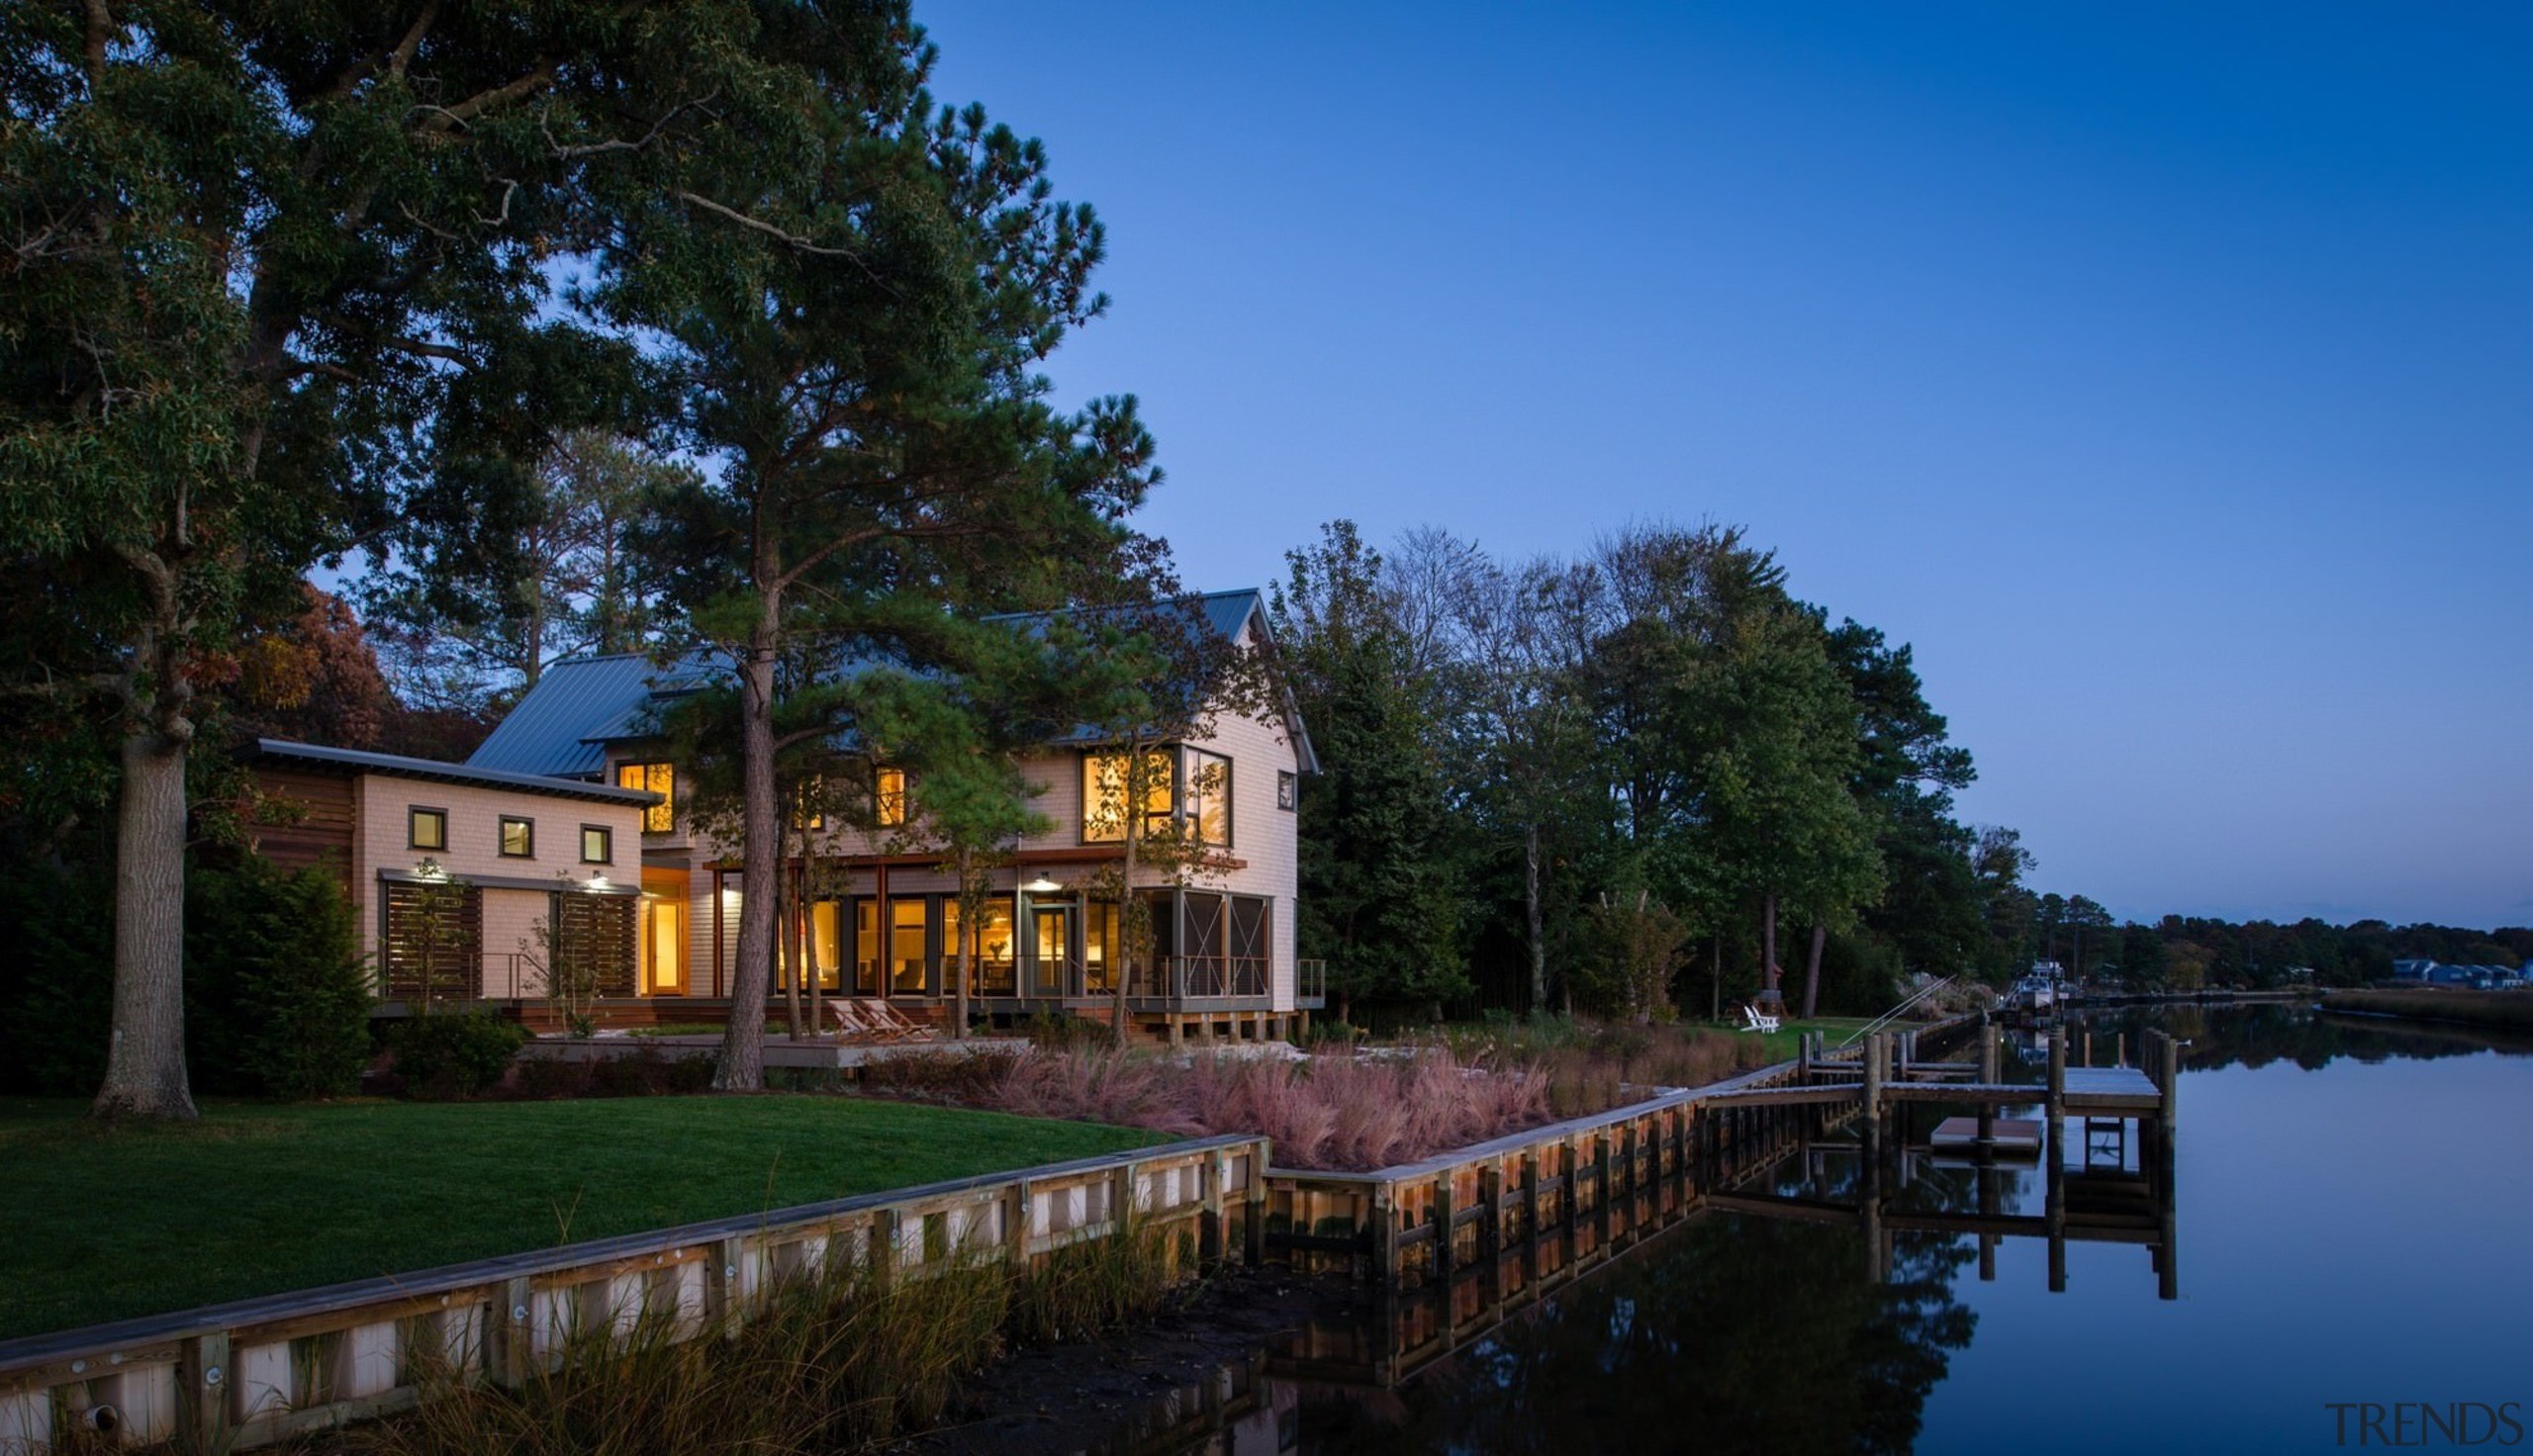 This home sits on the edge of a bayou, canal, cottage, estate, evening, home, house, lake, mansion, nature, plant, property, real estate, reflection, river, sky, tree, villa, water, waterway, black, blue